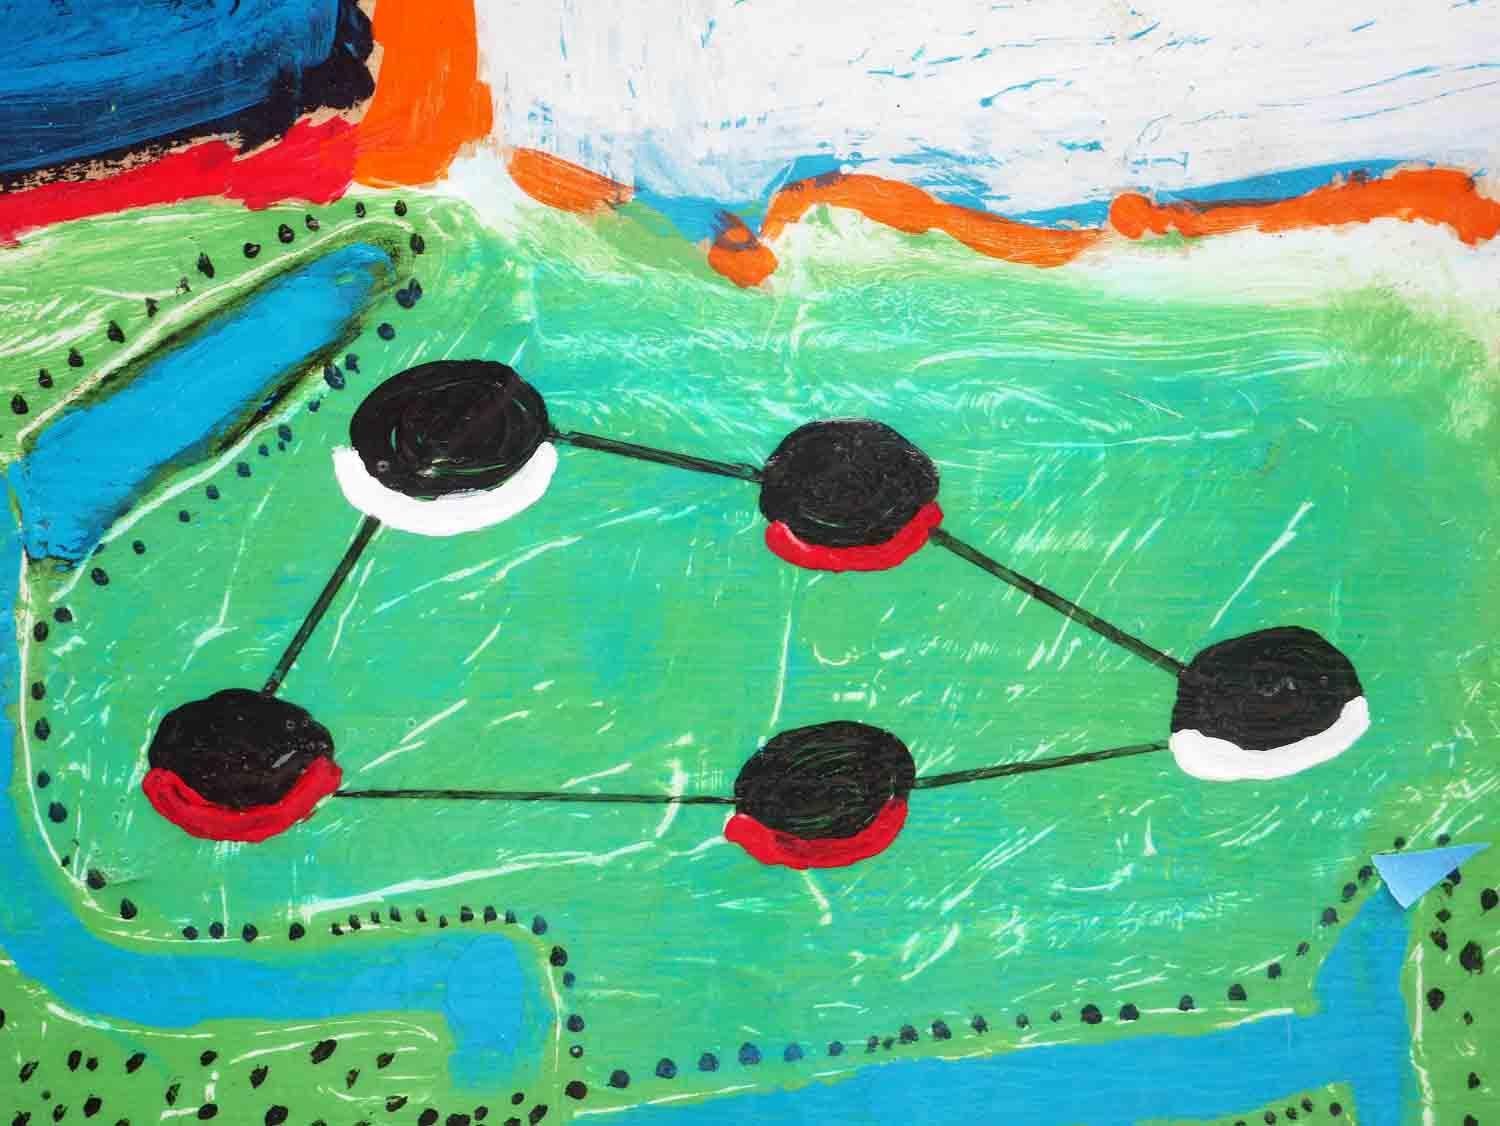 “Ants at Work” Blue, Orange, White, and Green Abstract Painting For Sale 5